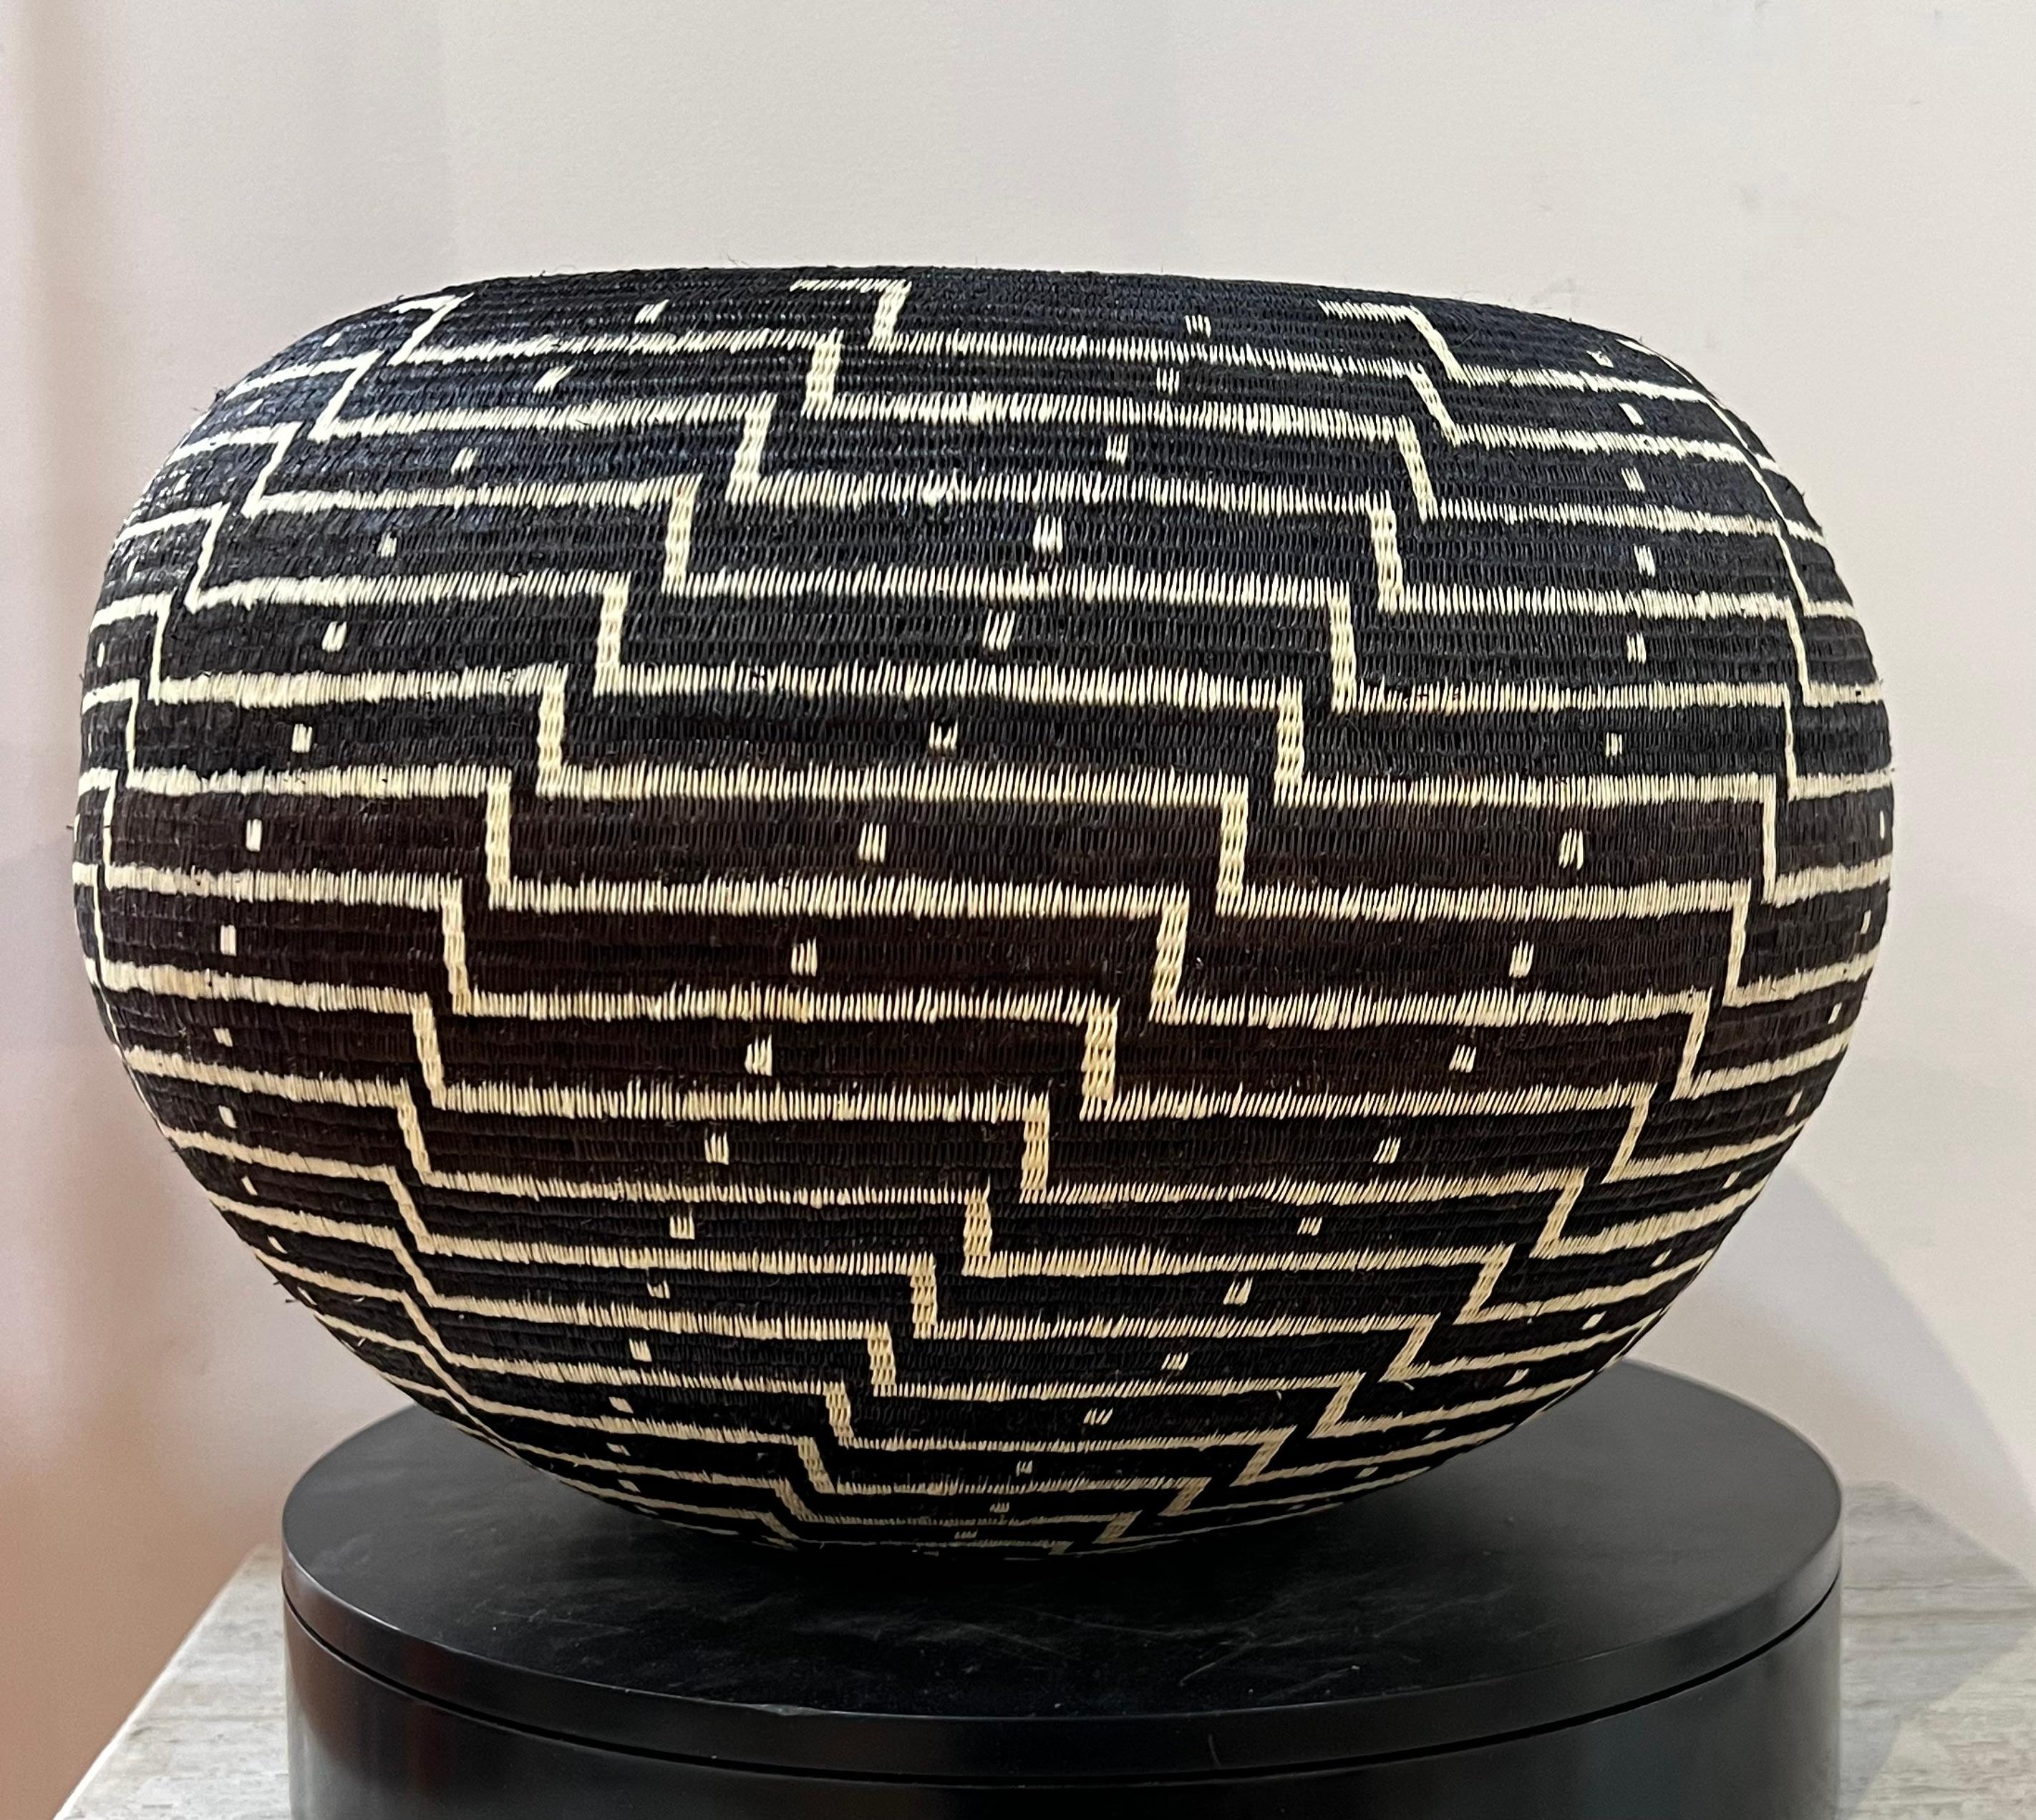 Black and White Basket, Wounaan Tribe, Panama, Rainforest, Geometric, Round - Mixed Media Art by Unknown